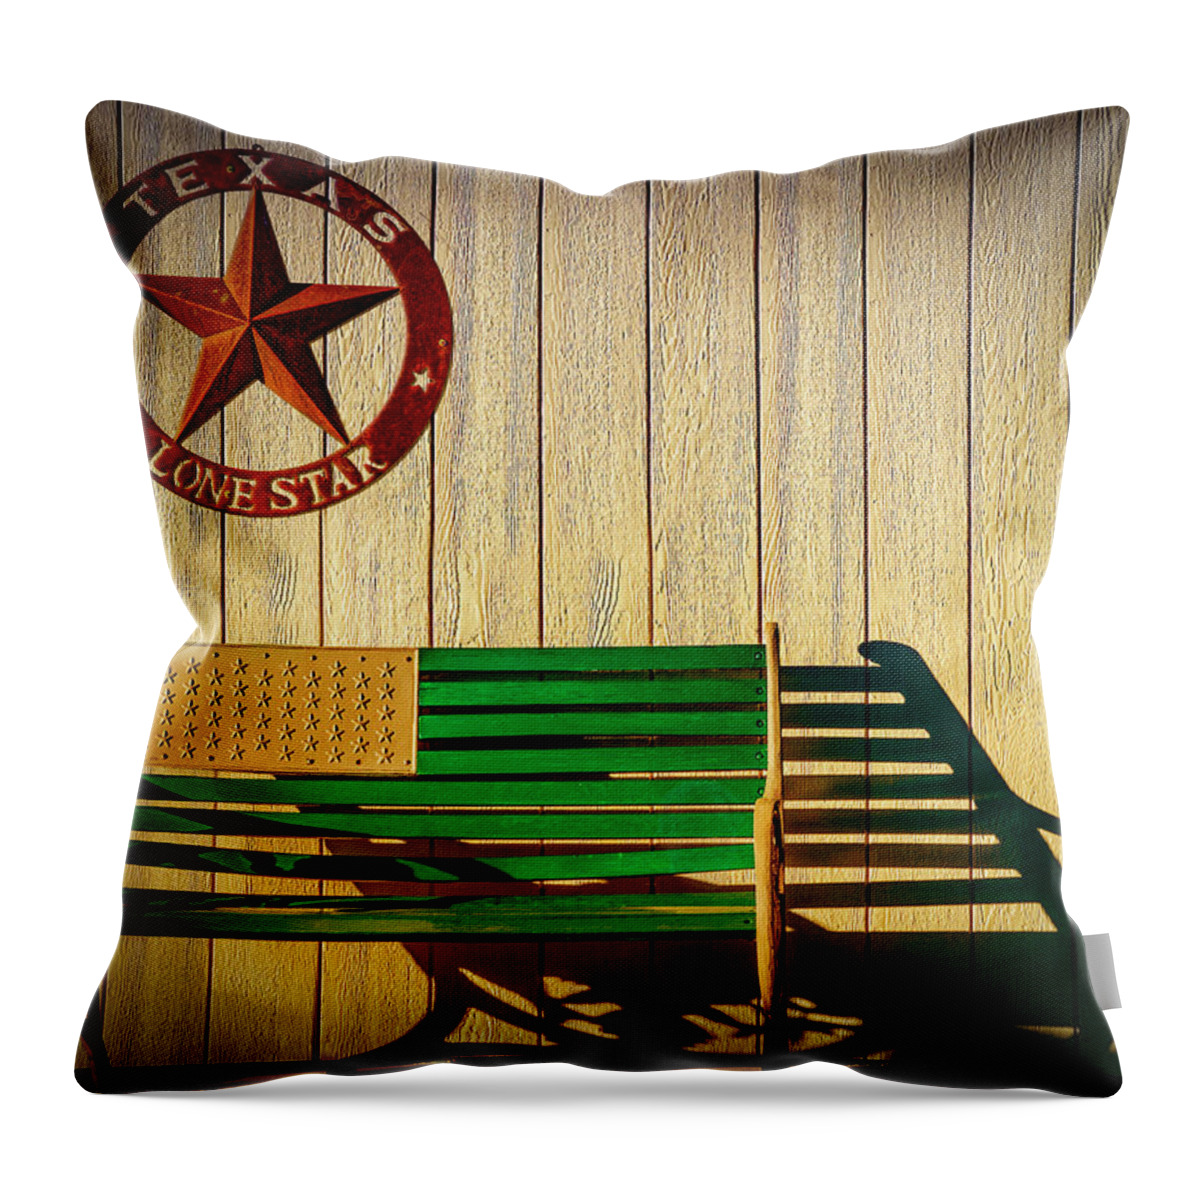 Photography Throw Pillow featuring the photograph Texas Lone Star by Paul Wear